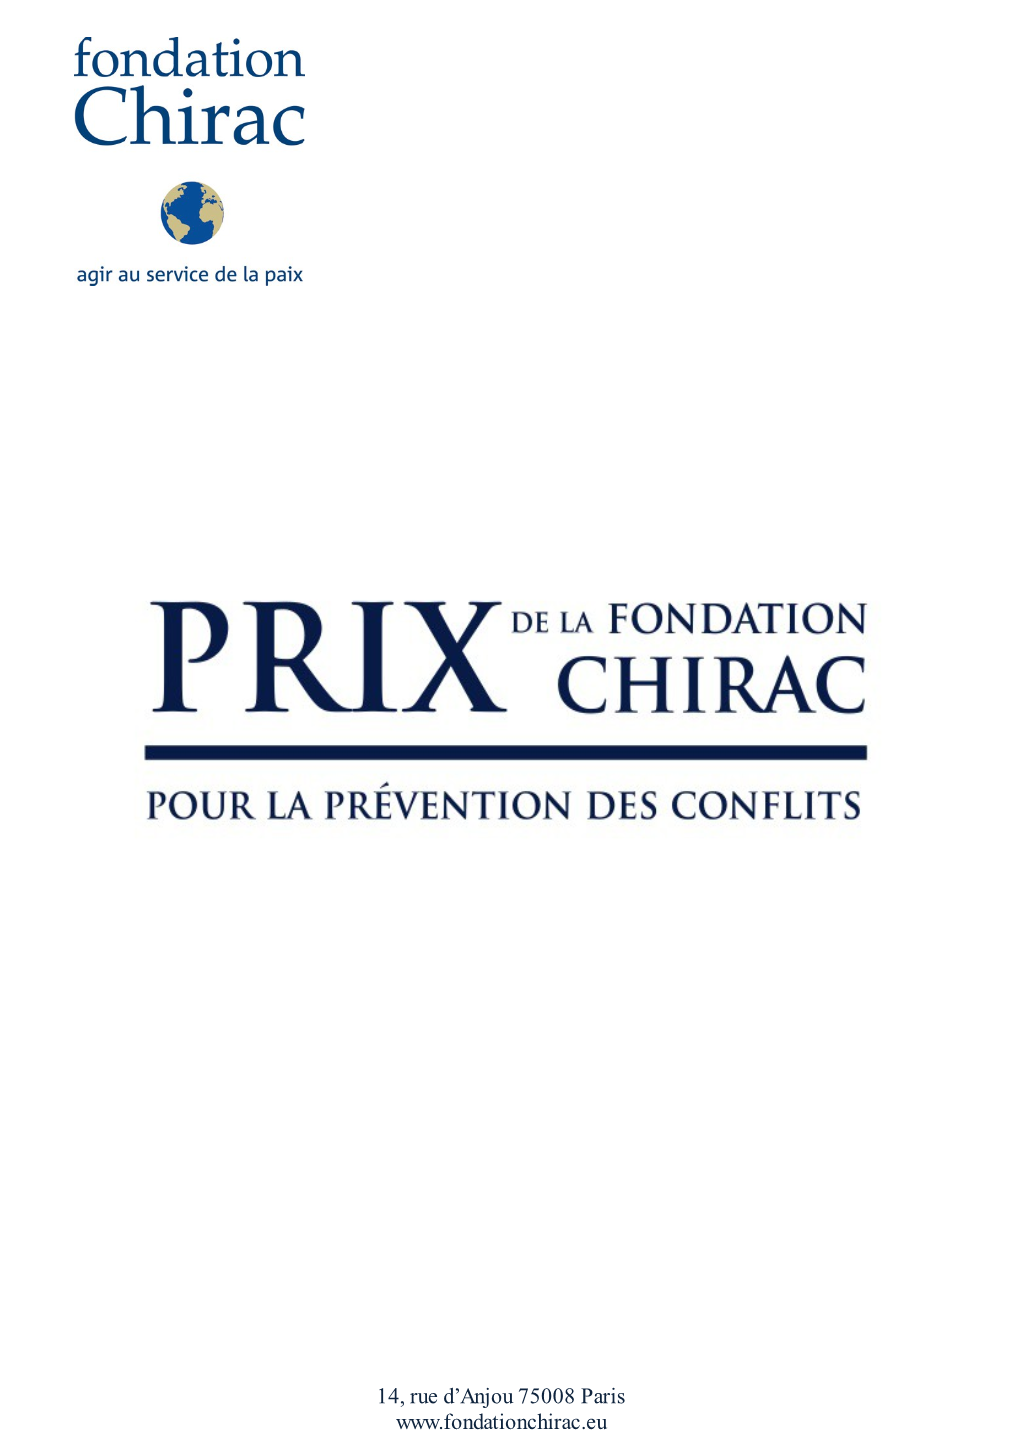 The Fondation Chirac Prize for Conflict Prevention